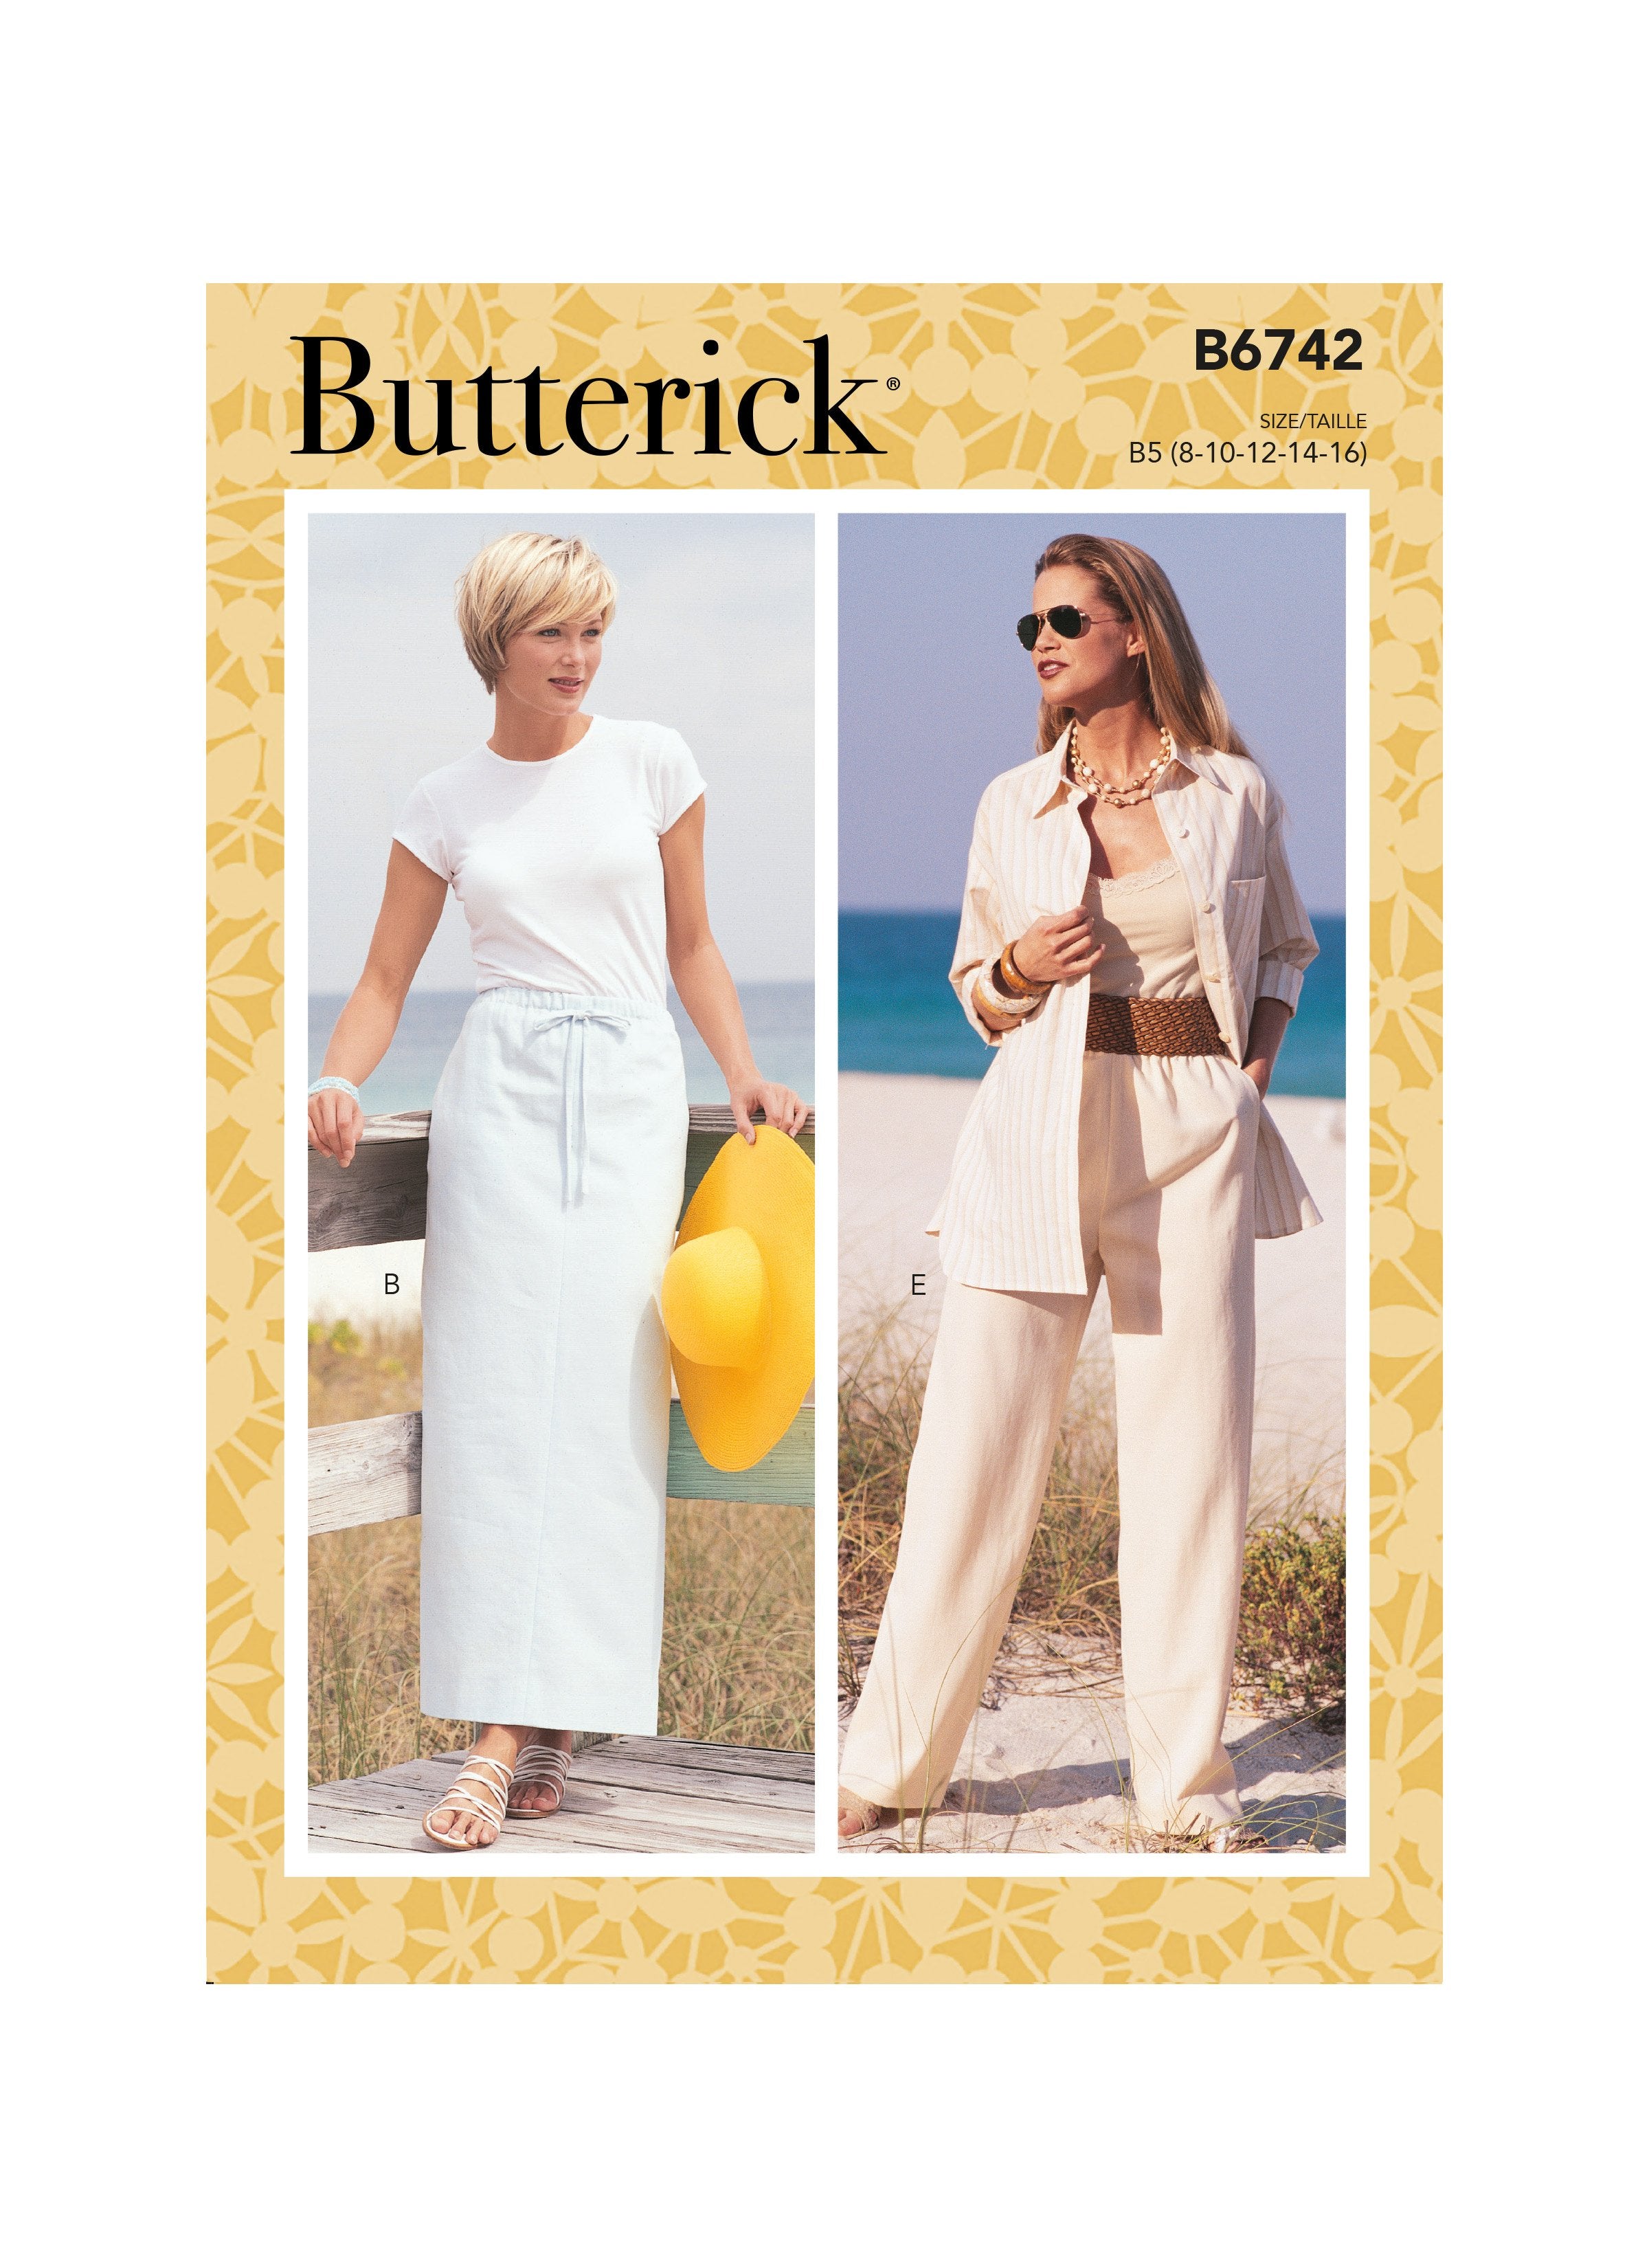 Butterick Sewing Pattern 6742 Misses'/ Petite Elastic-Waist Skirts, Shorts and Pants from Jaycotts Sewing Supplies